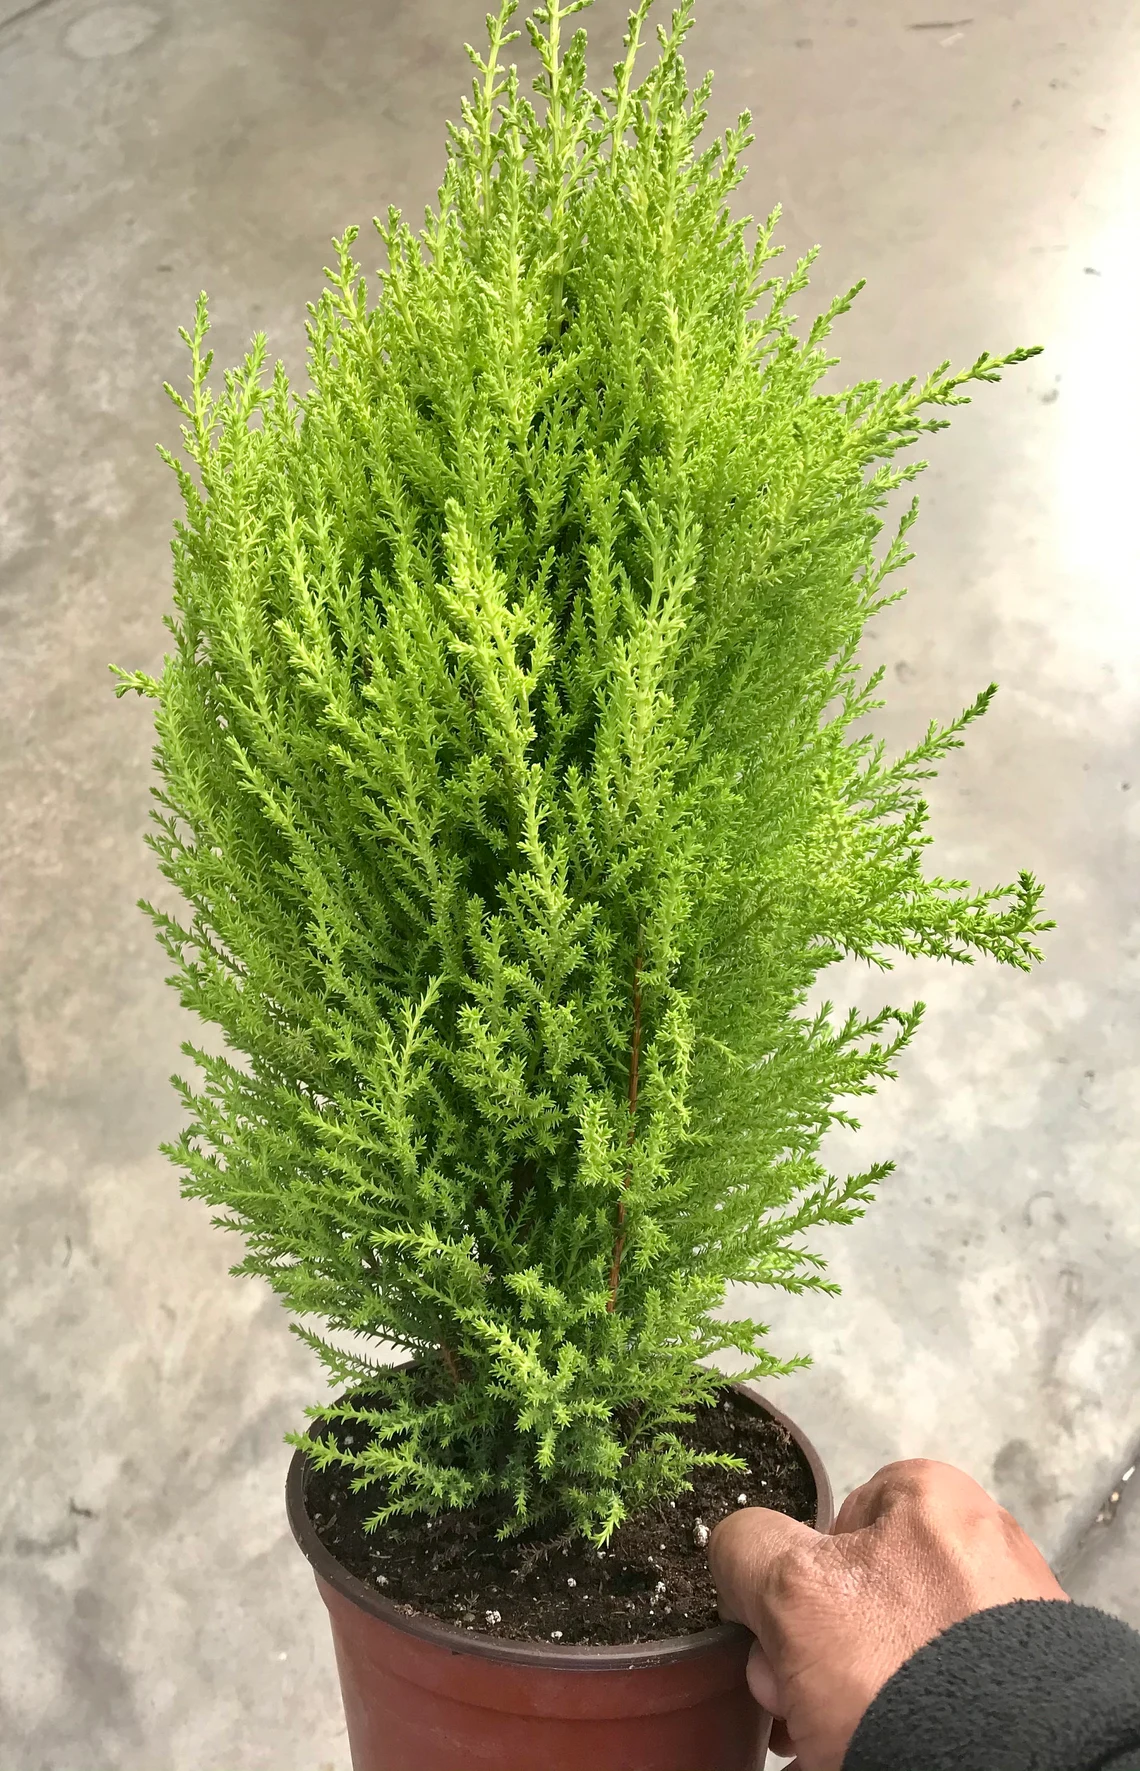 cypress tree in pot held by hand